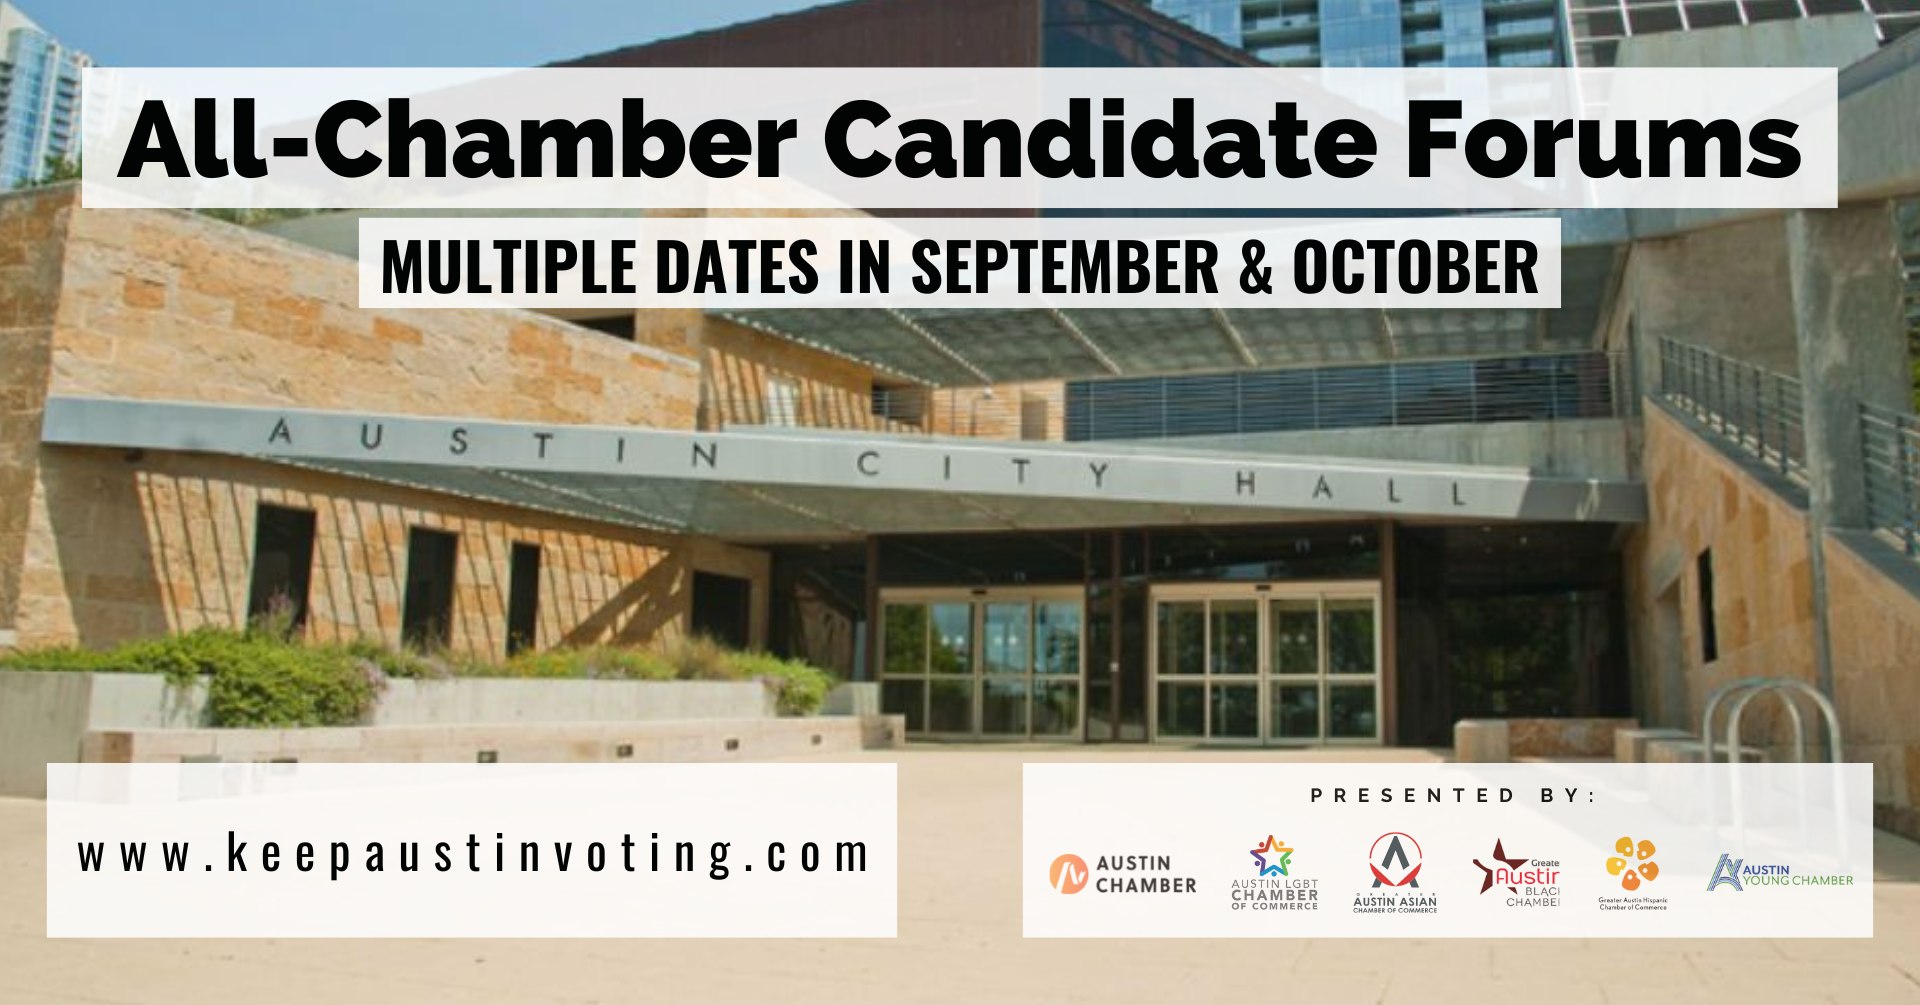 All-Chamber Candidate Forums